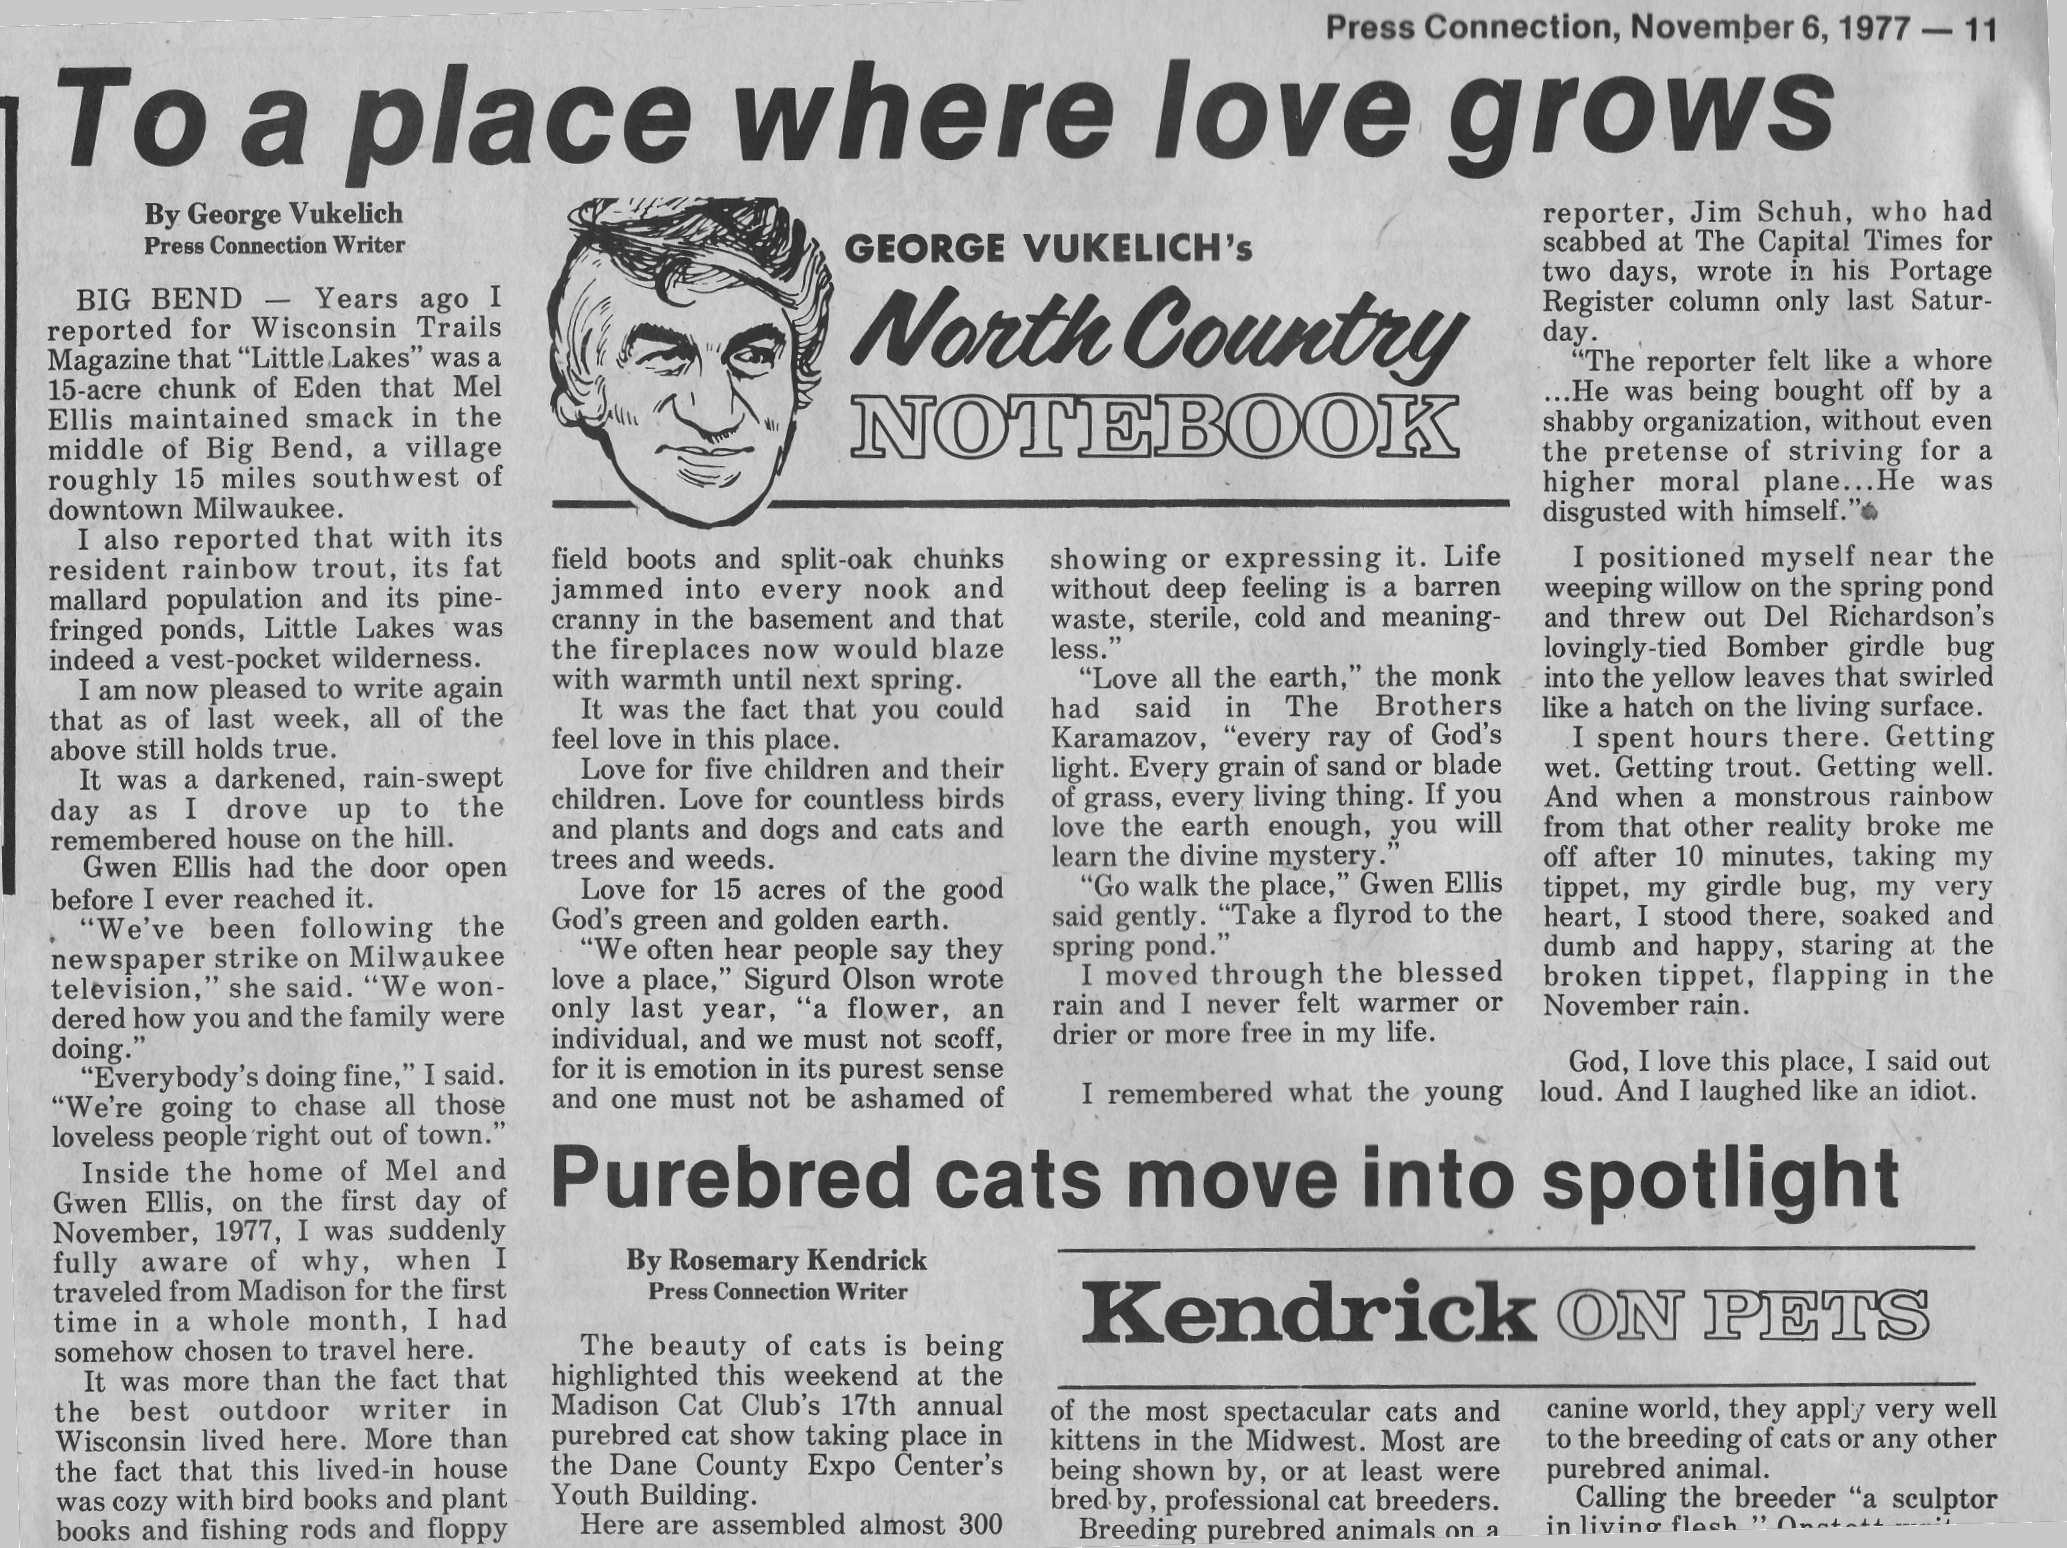 MPC To a Place Where Love Grows 11-6-77